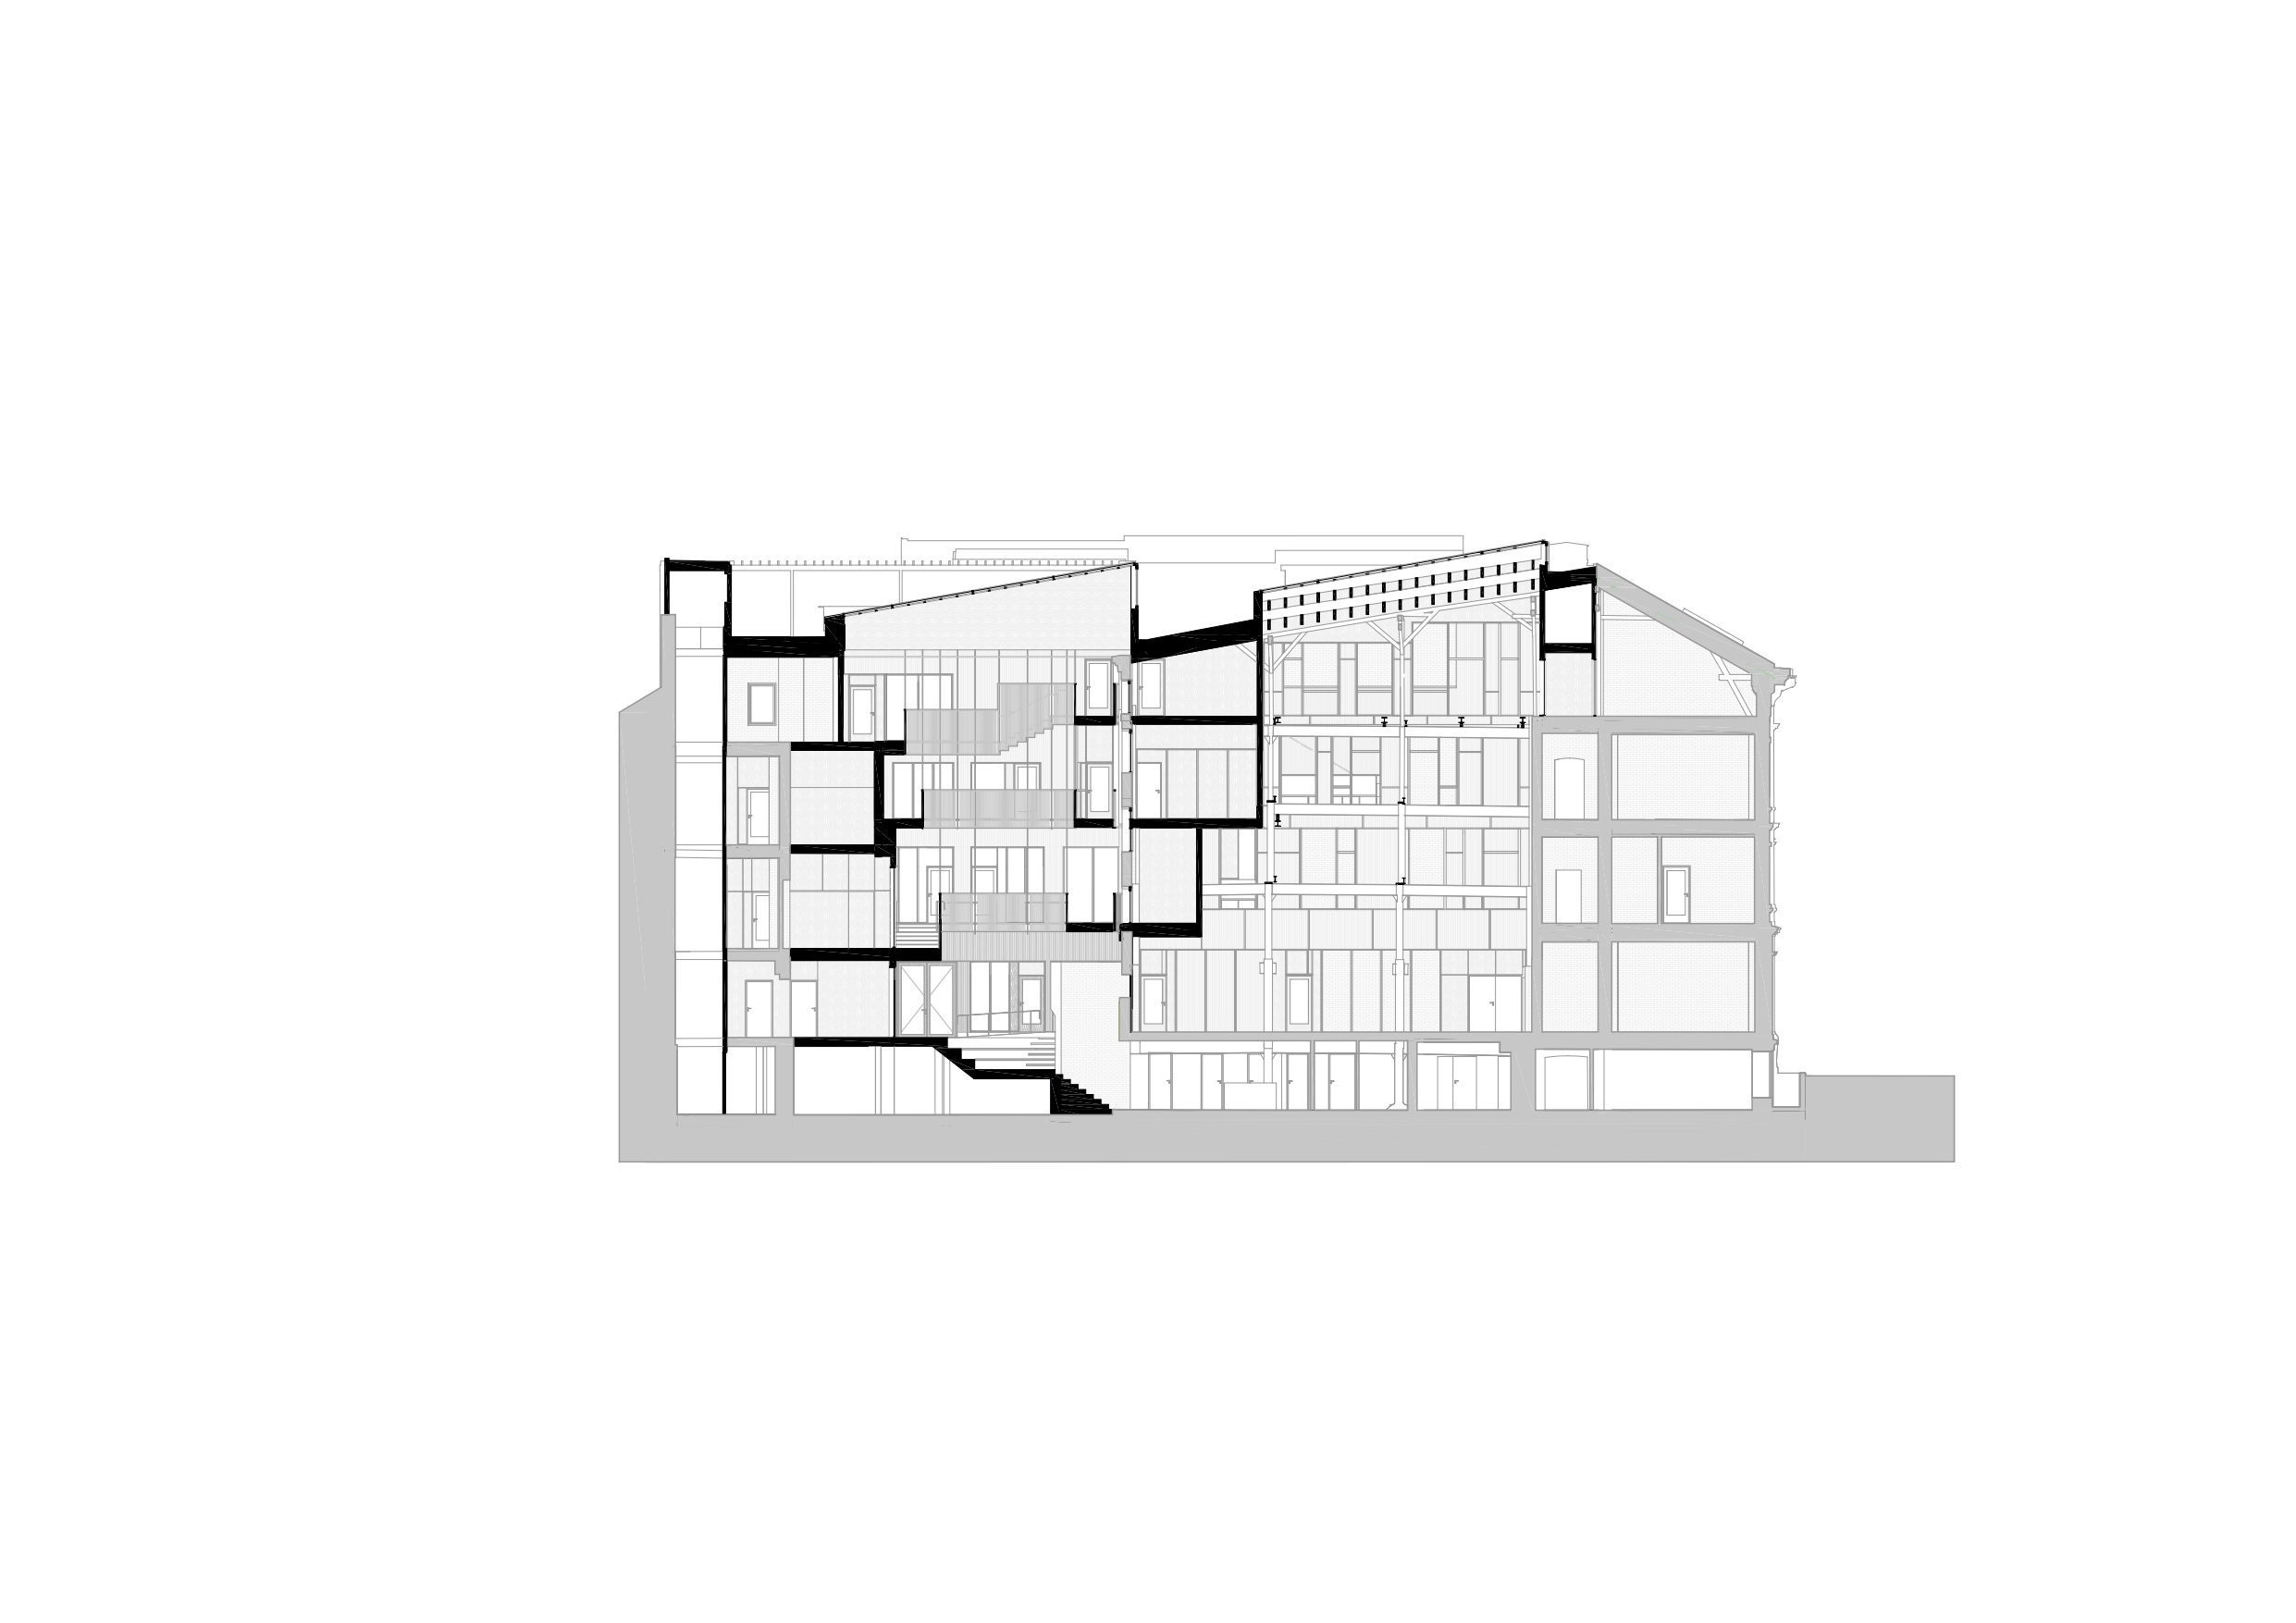 Cut section drawing of Pressens Hus